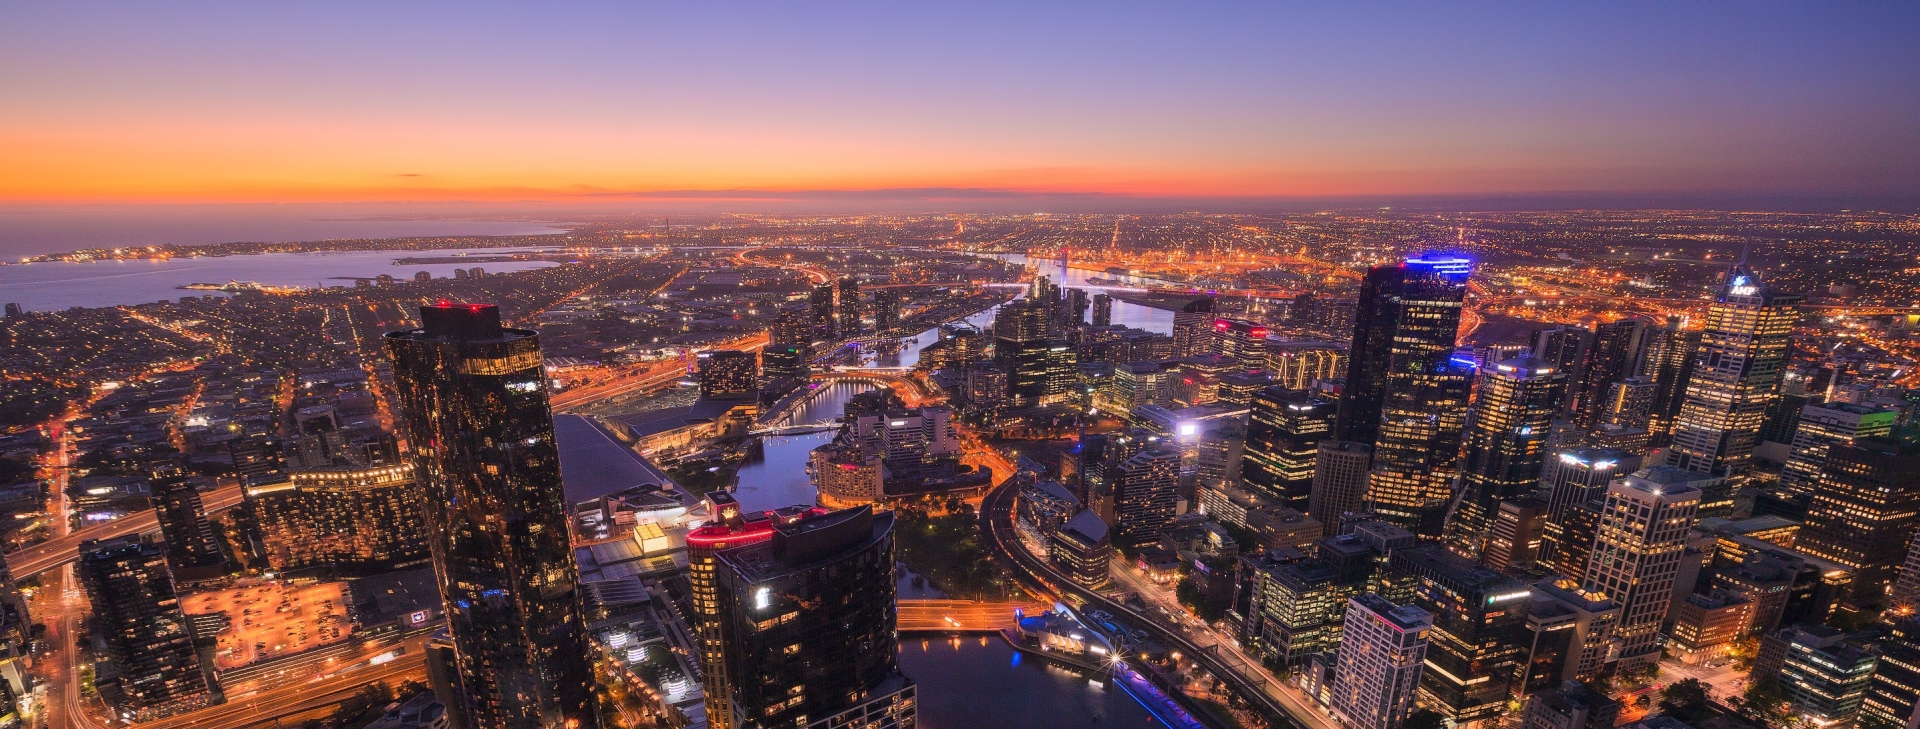 Sunset view from the Eureka Skydeck, Melbourne, VIC © Tourism Australia